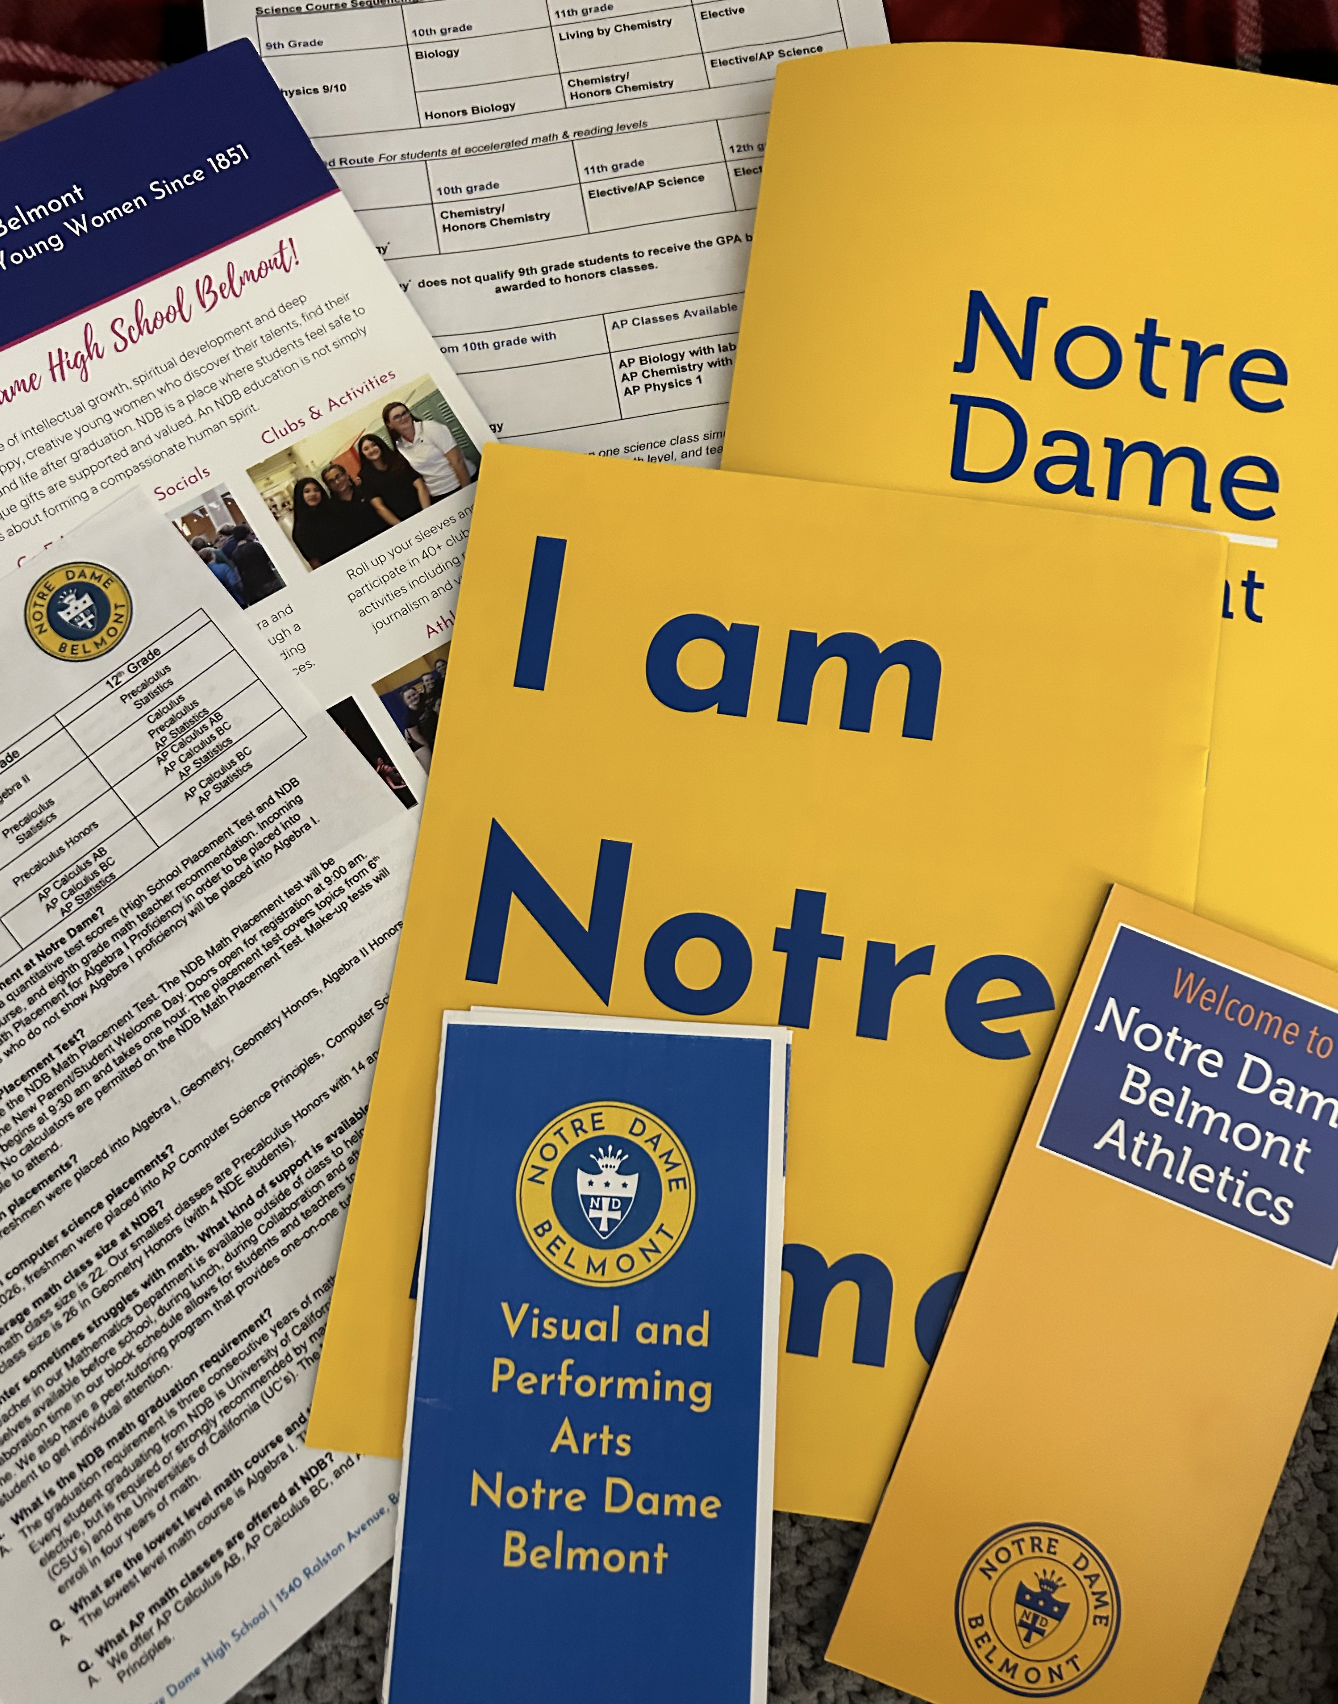 Prospective students are given brochures and papers to learn more about what NDB has to offer.